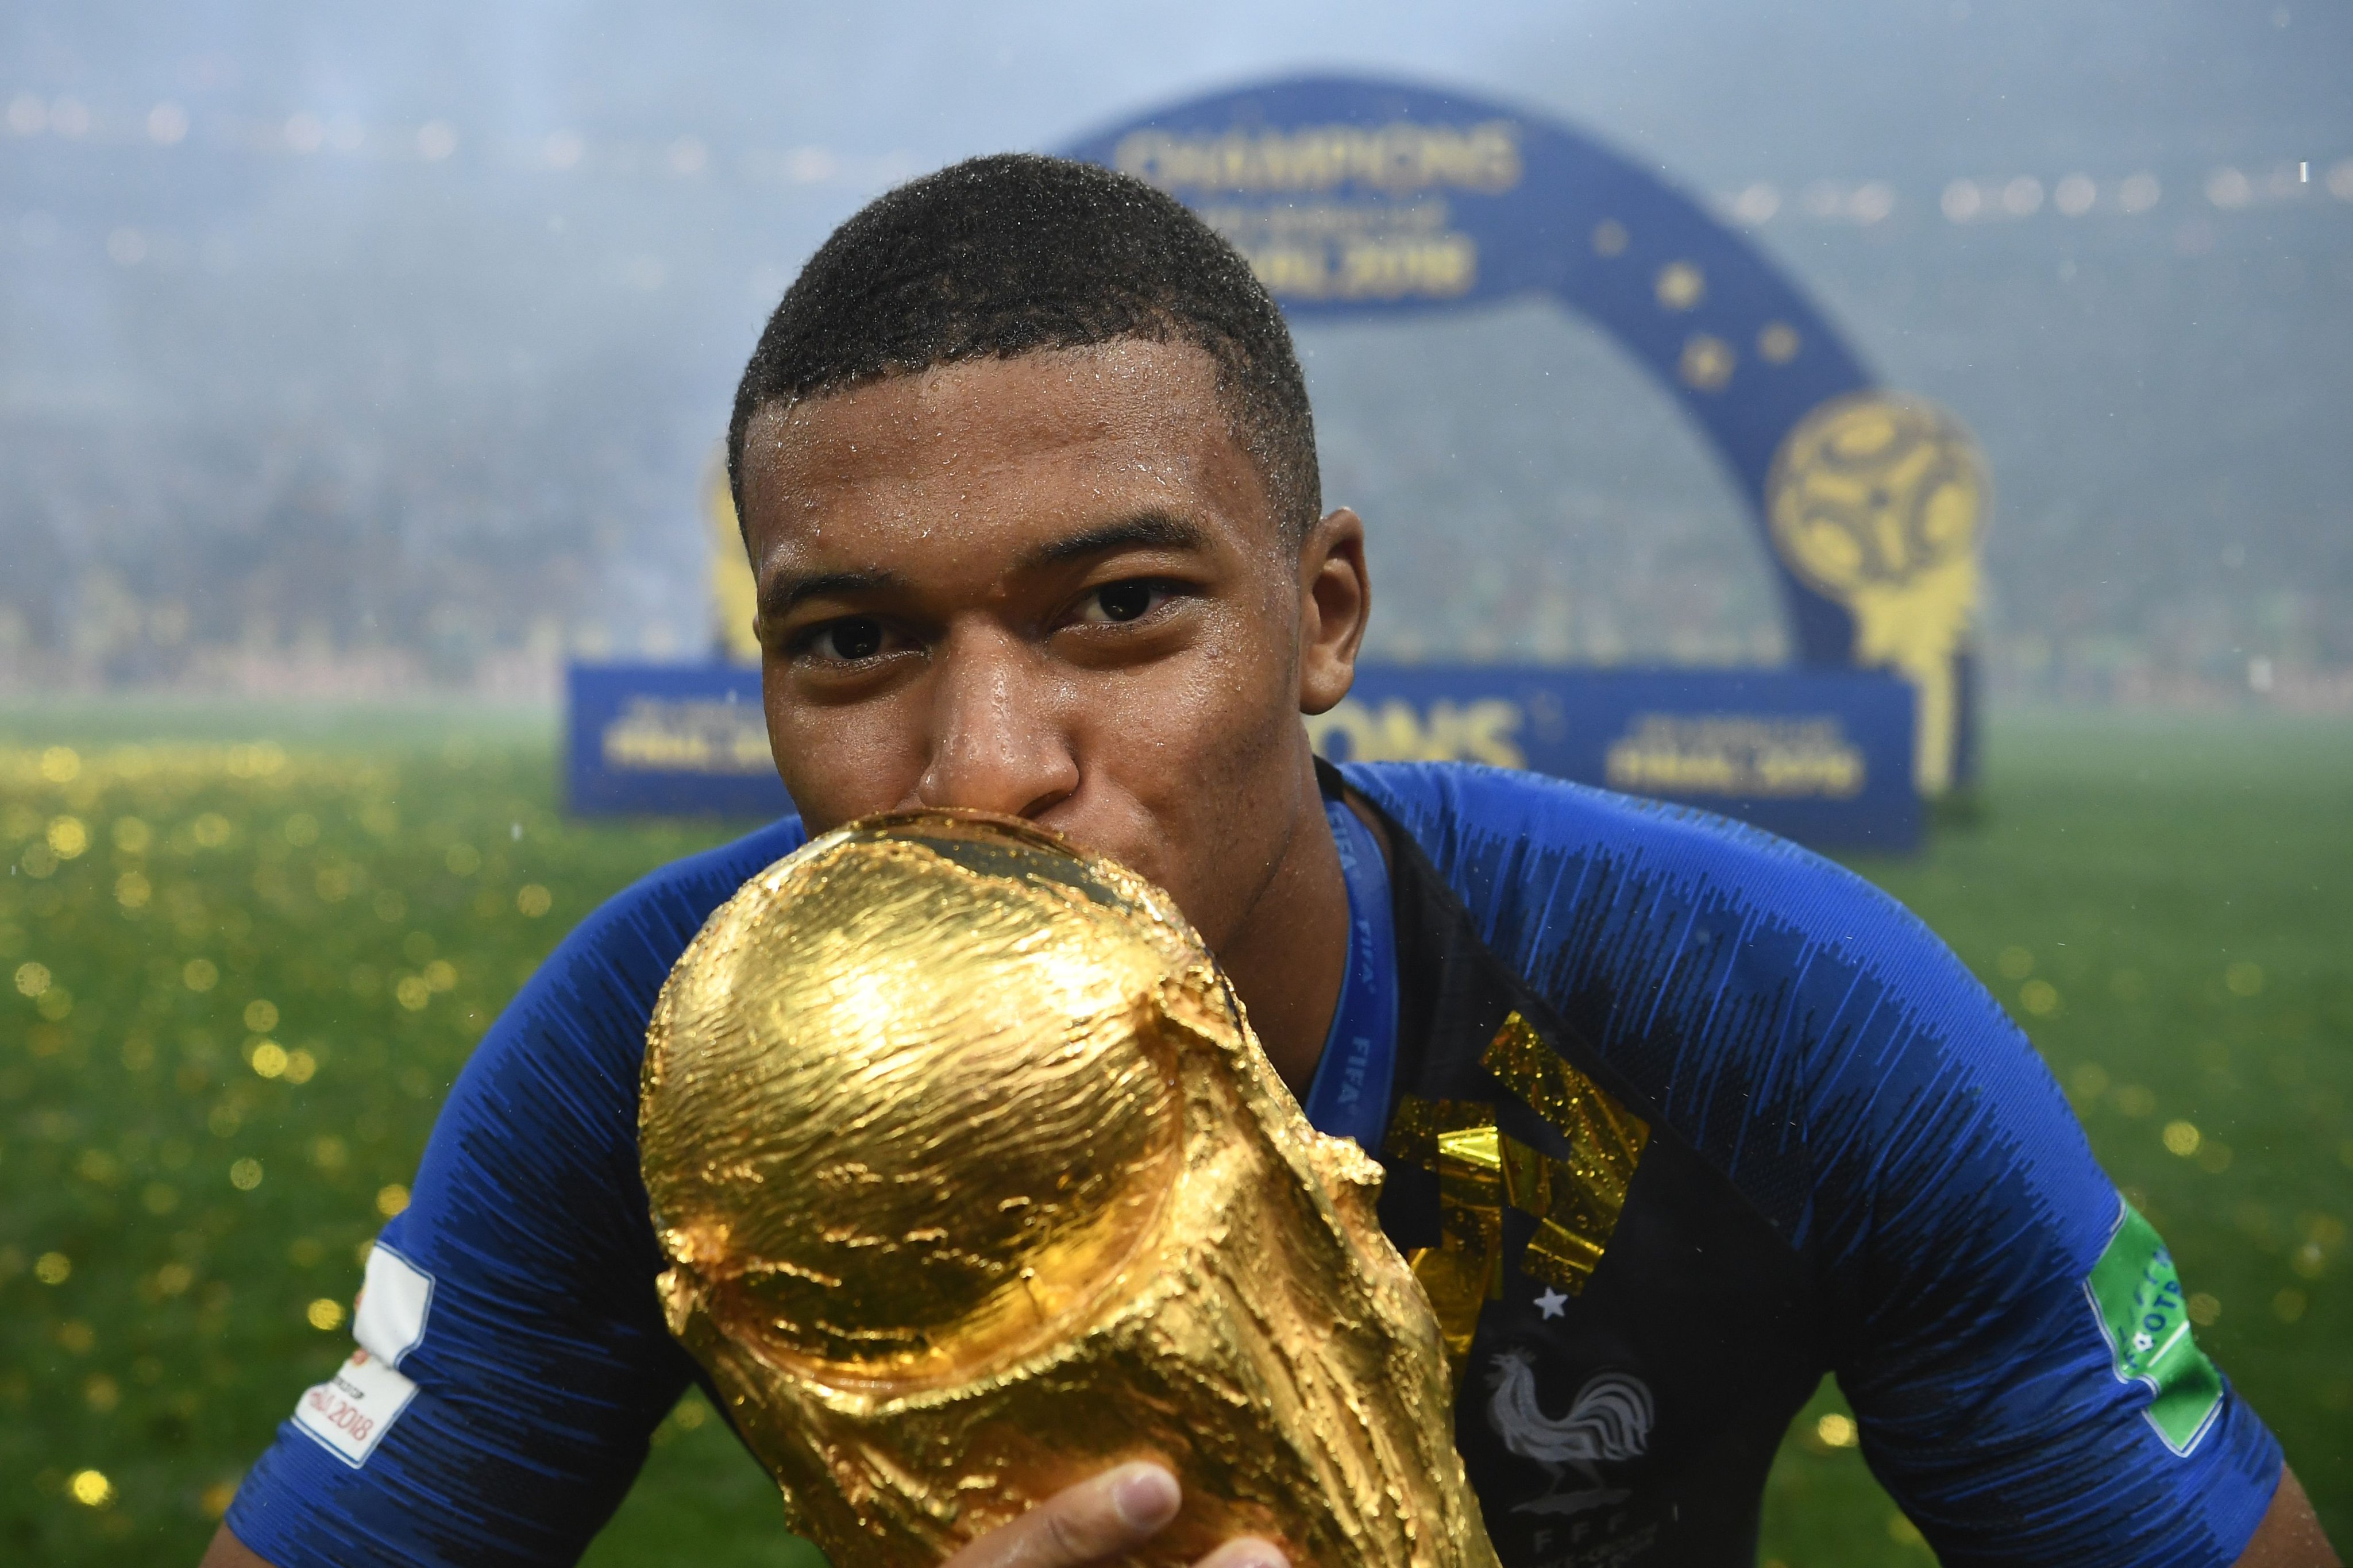 Kylian Mbappe is type of guy who can turn draw into win, proclaims Thierry Henry